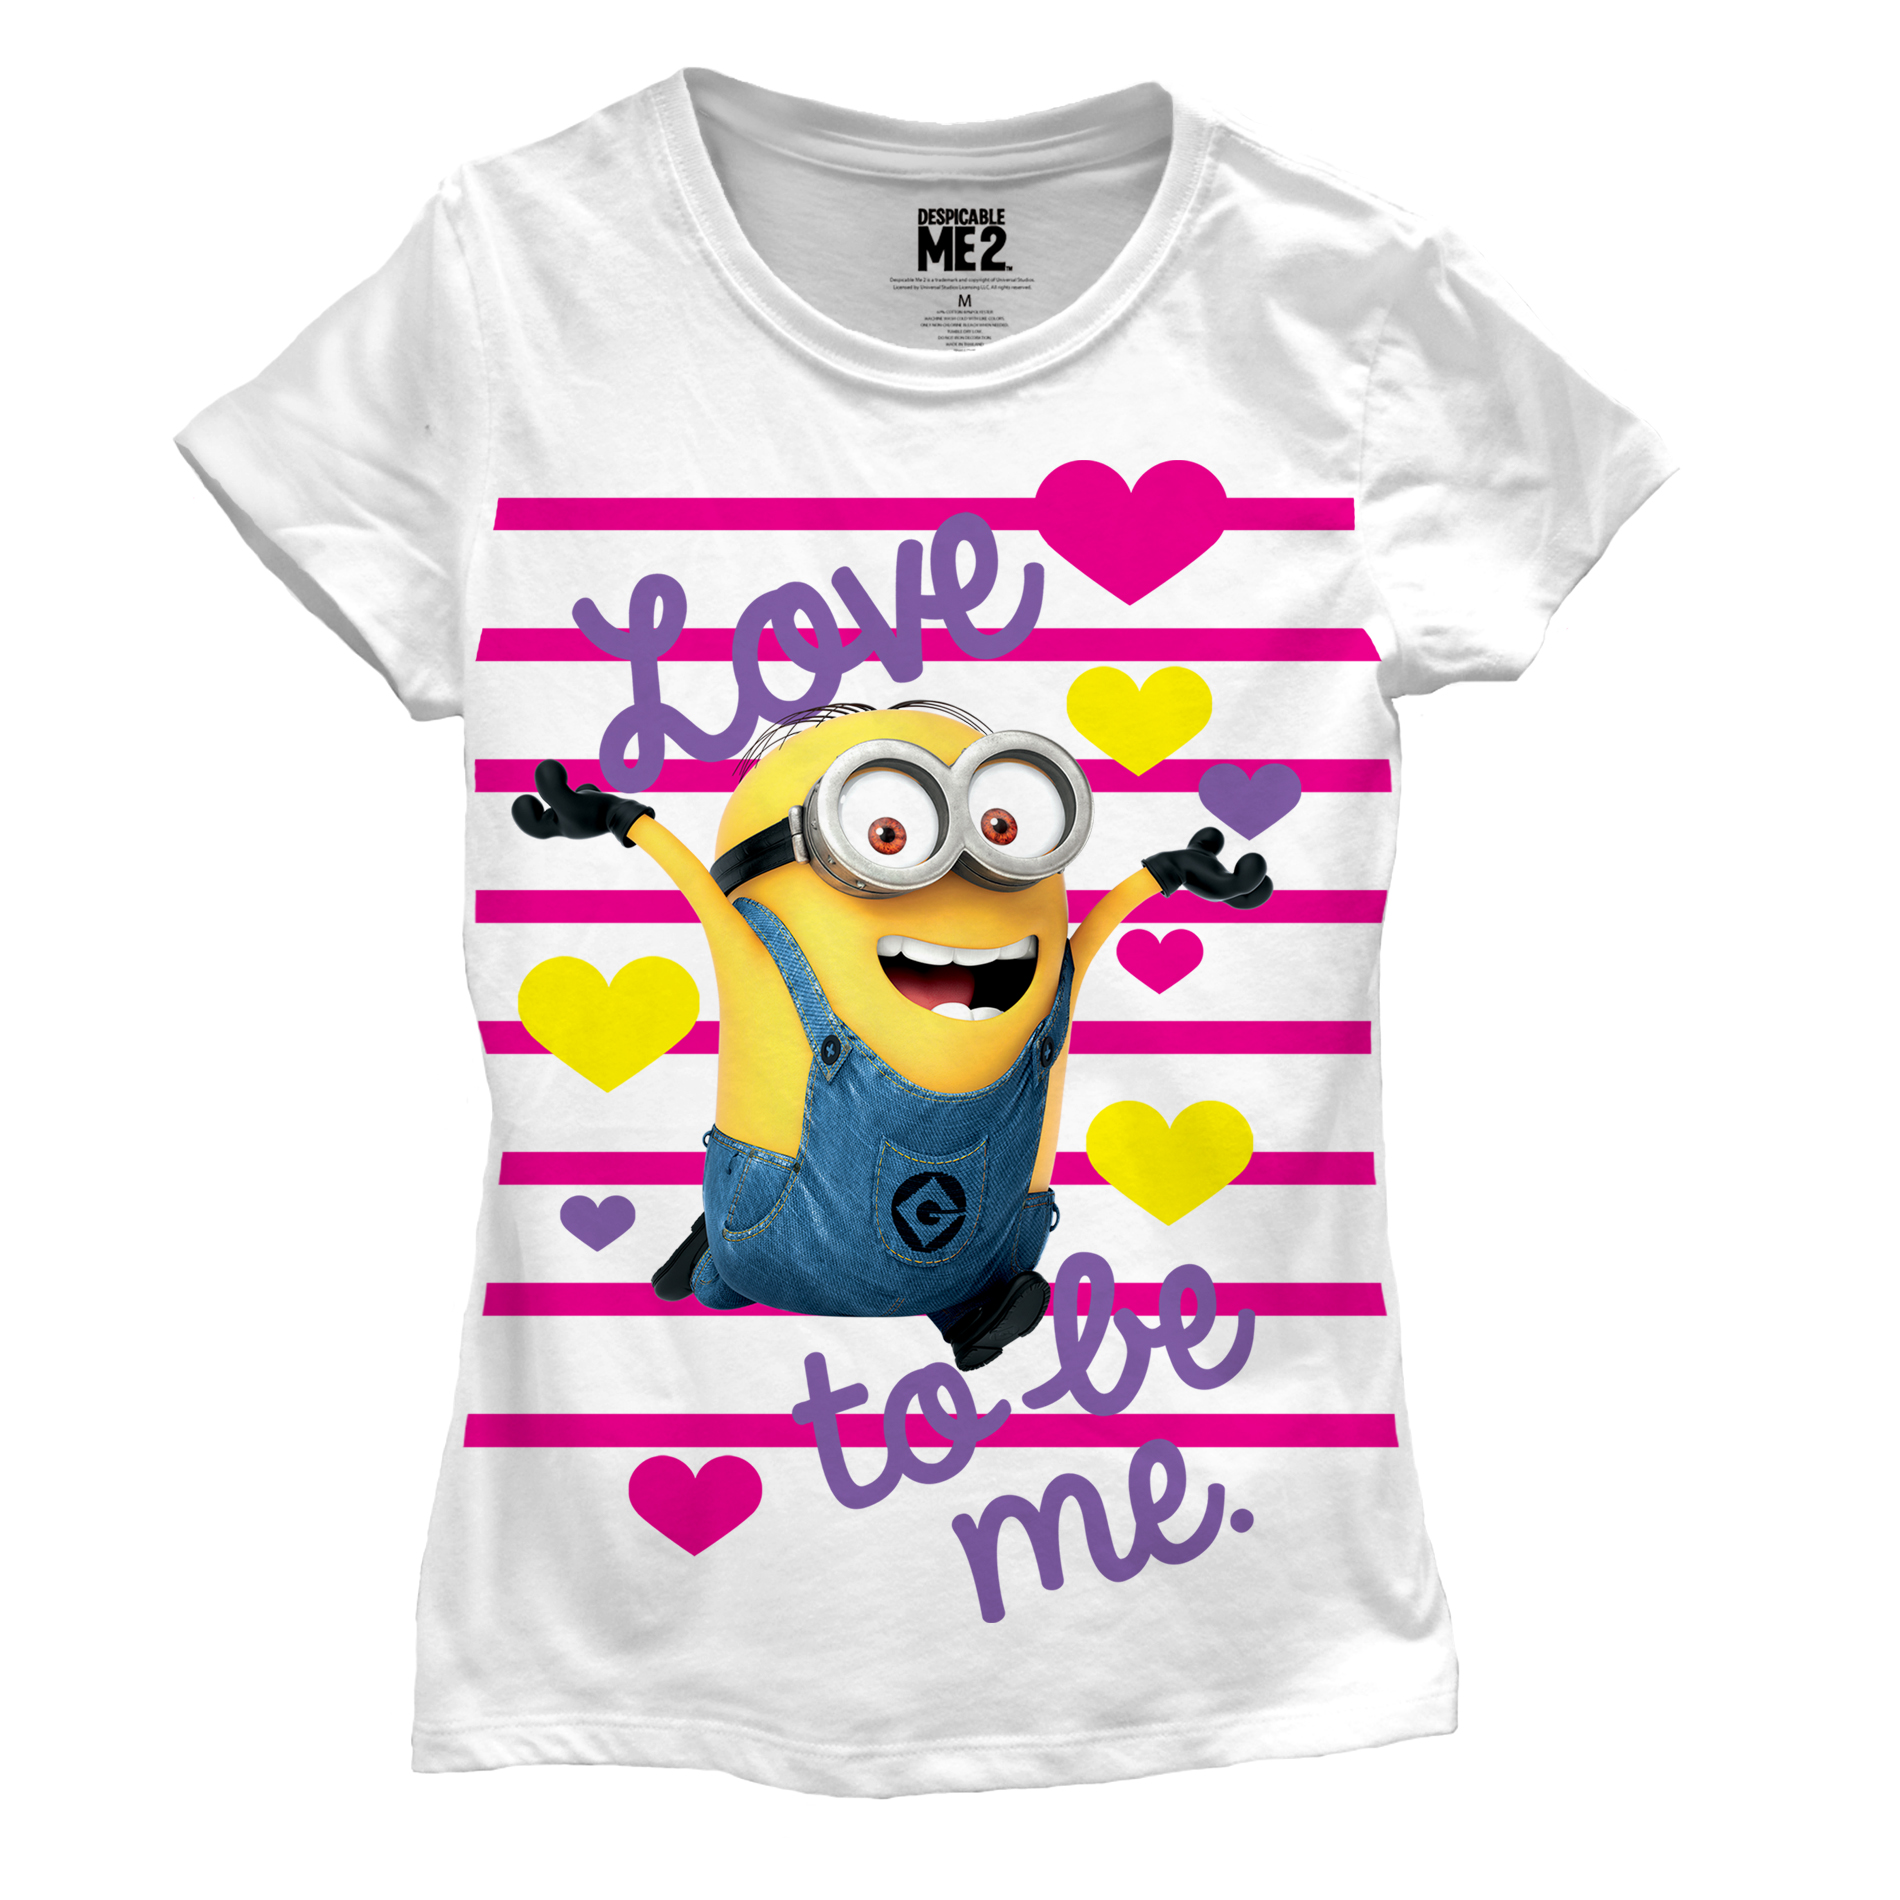 Illumination Entertainment Girl's Graphic T-Shirt - Minion & Love To Be Me